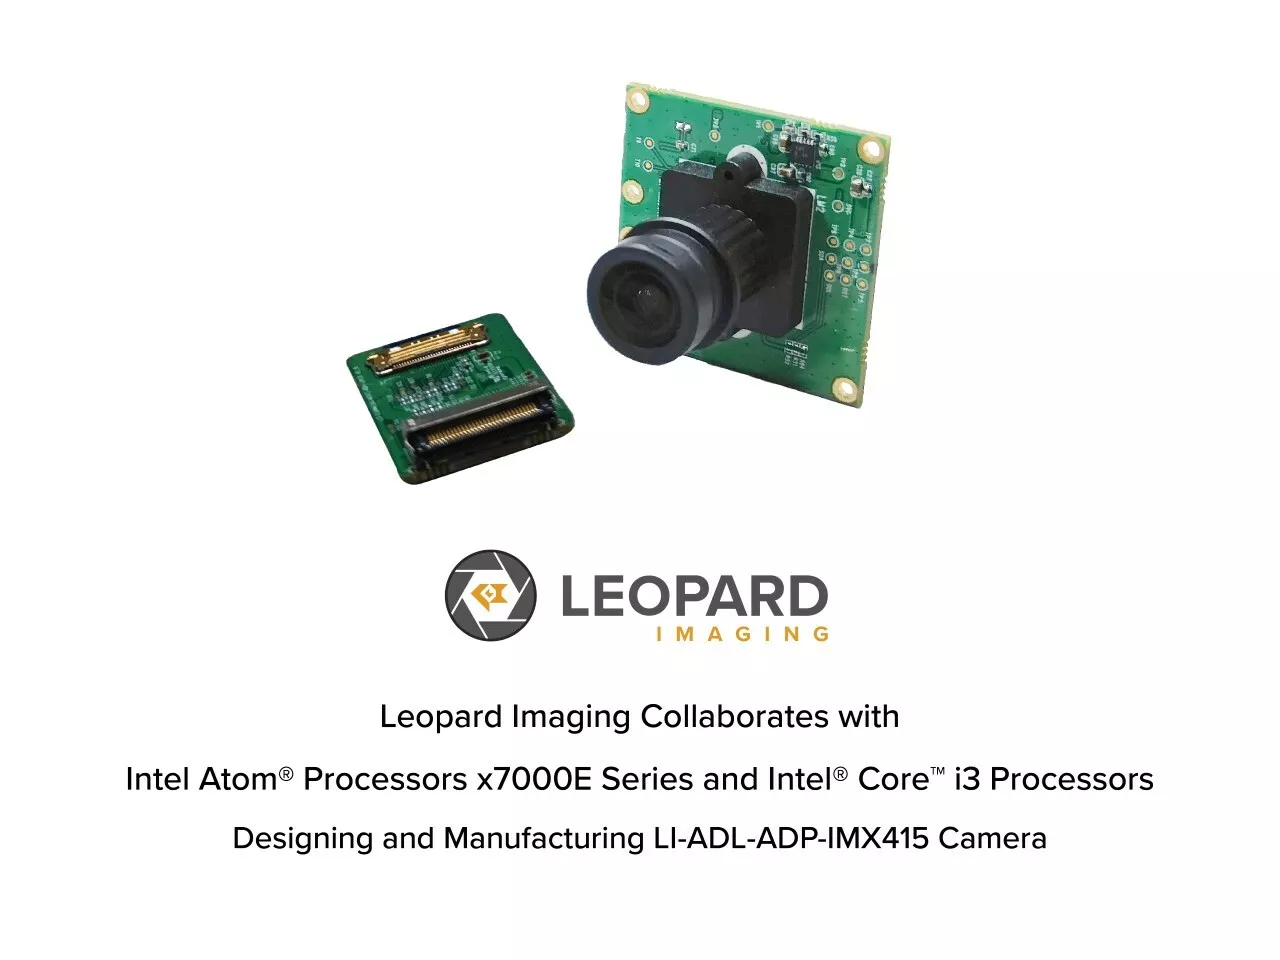 Leopard Imaging Announces Intelligent Embedded Solutions Collaborating with Intel img#1